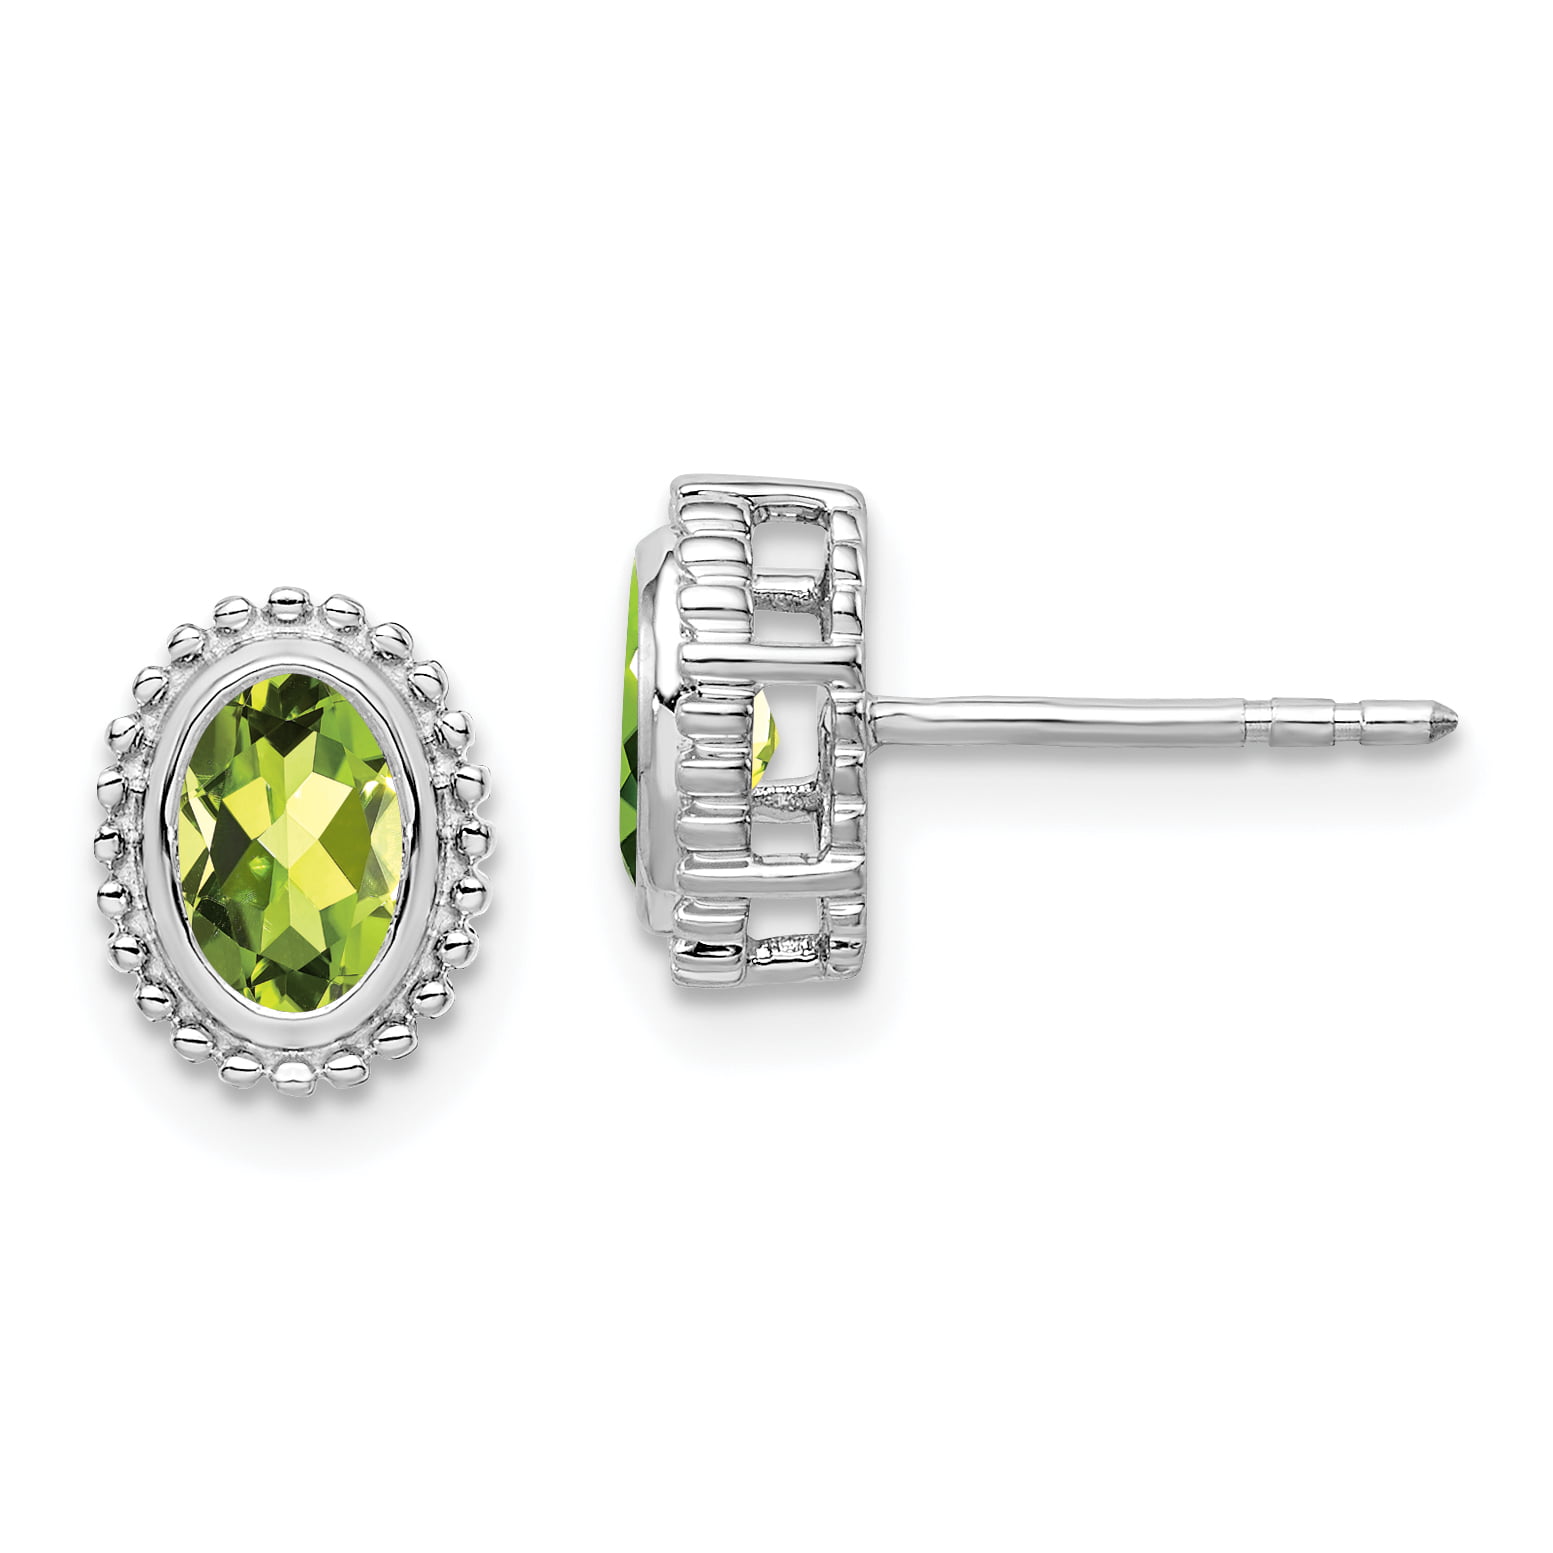 18mm x 5mm Solid 14k White Gold Simulated Peridot Dangle Post Earrings 